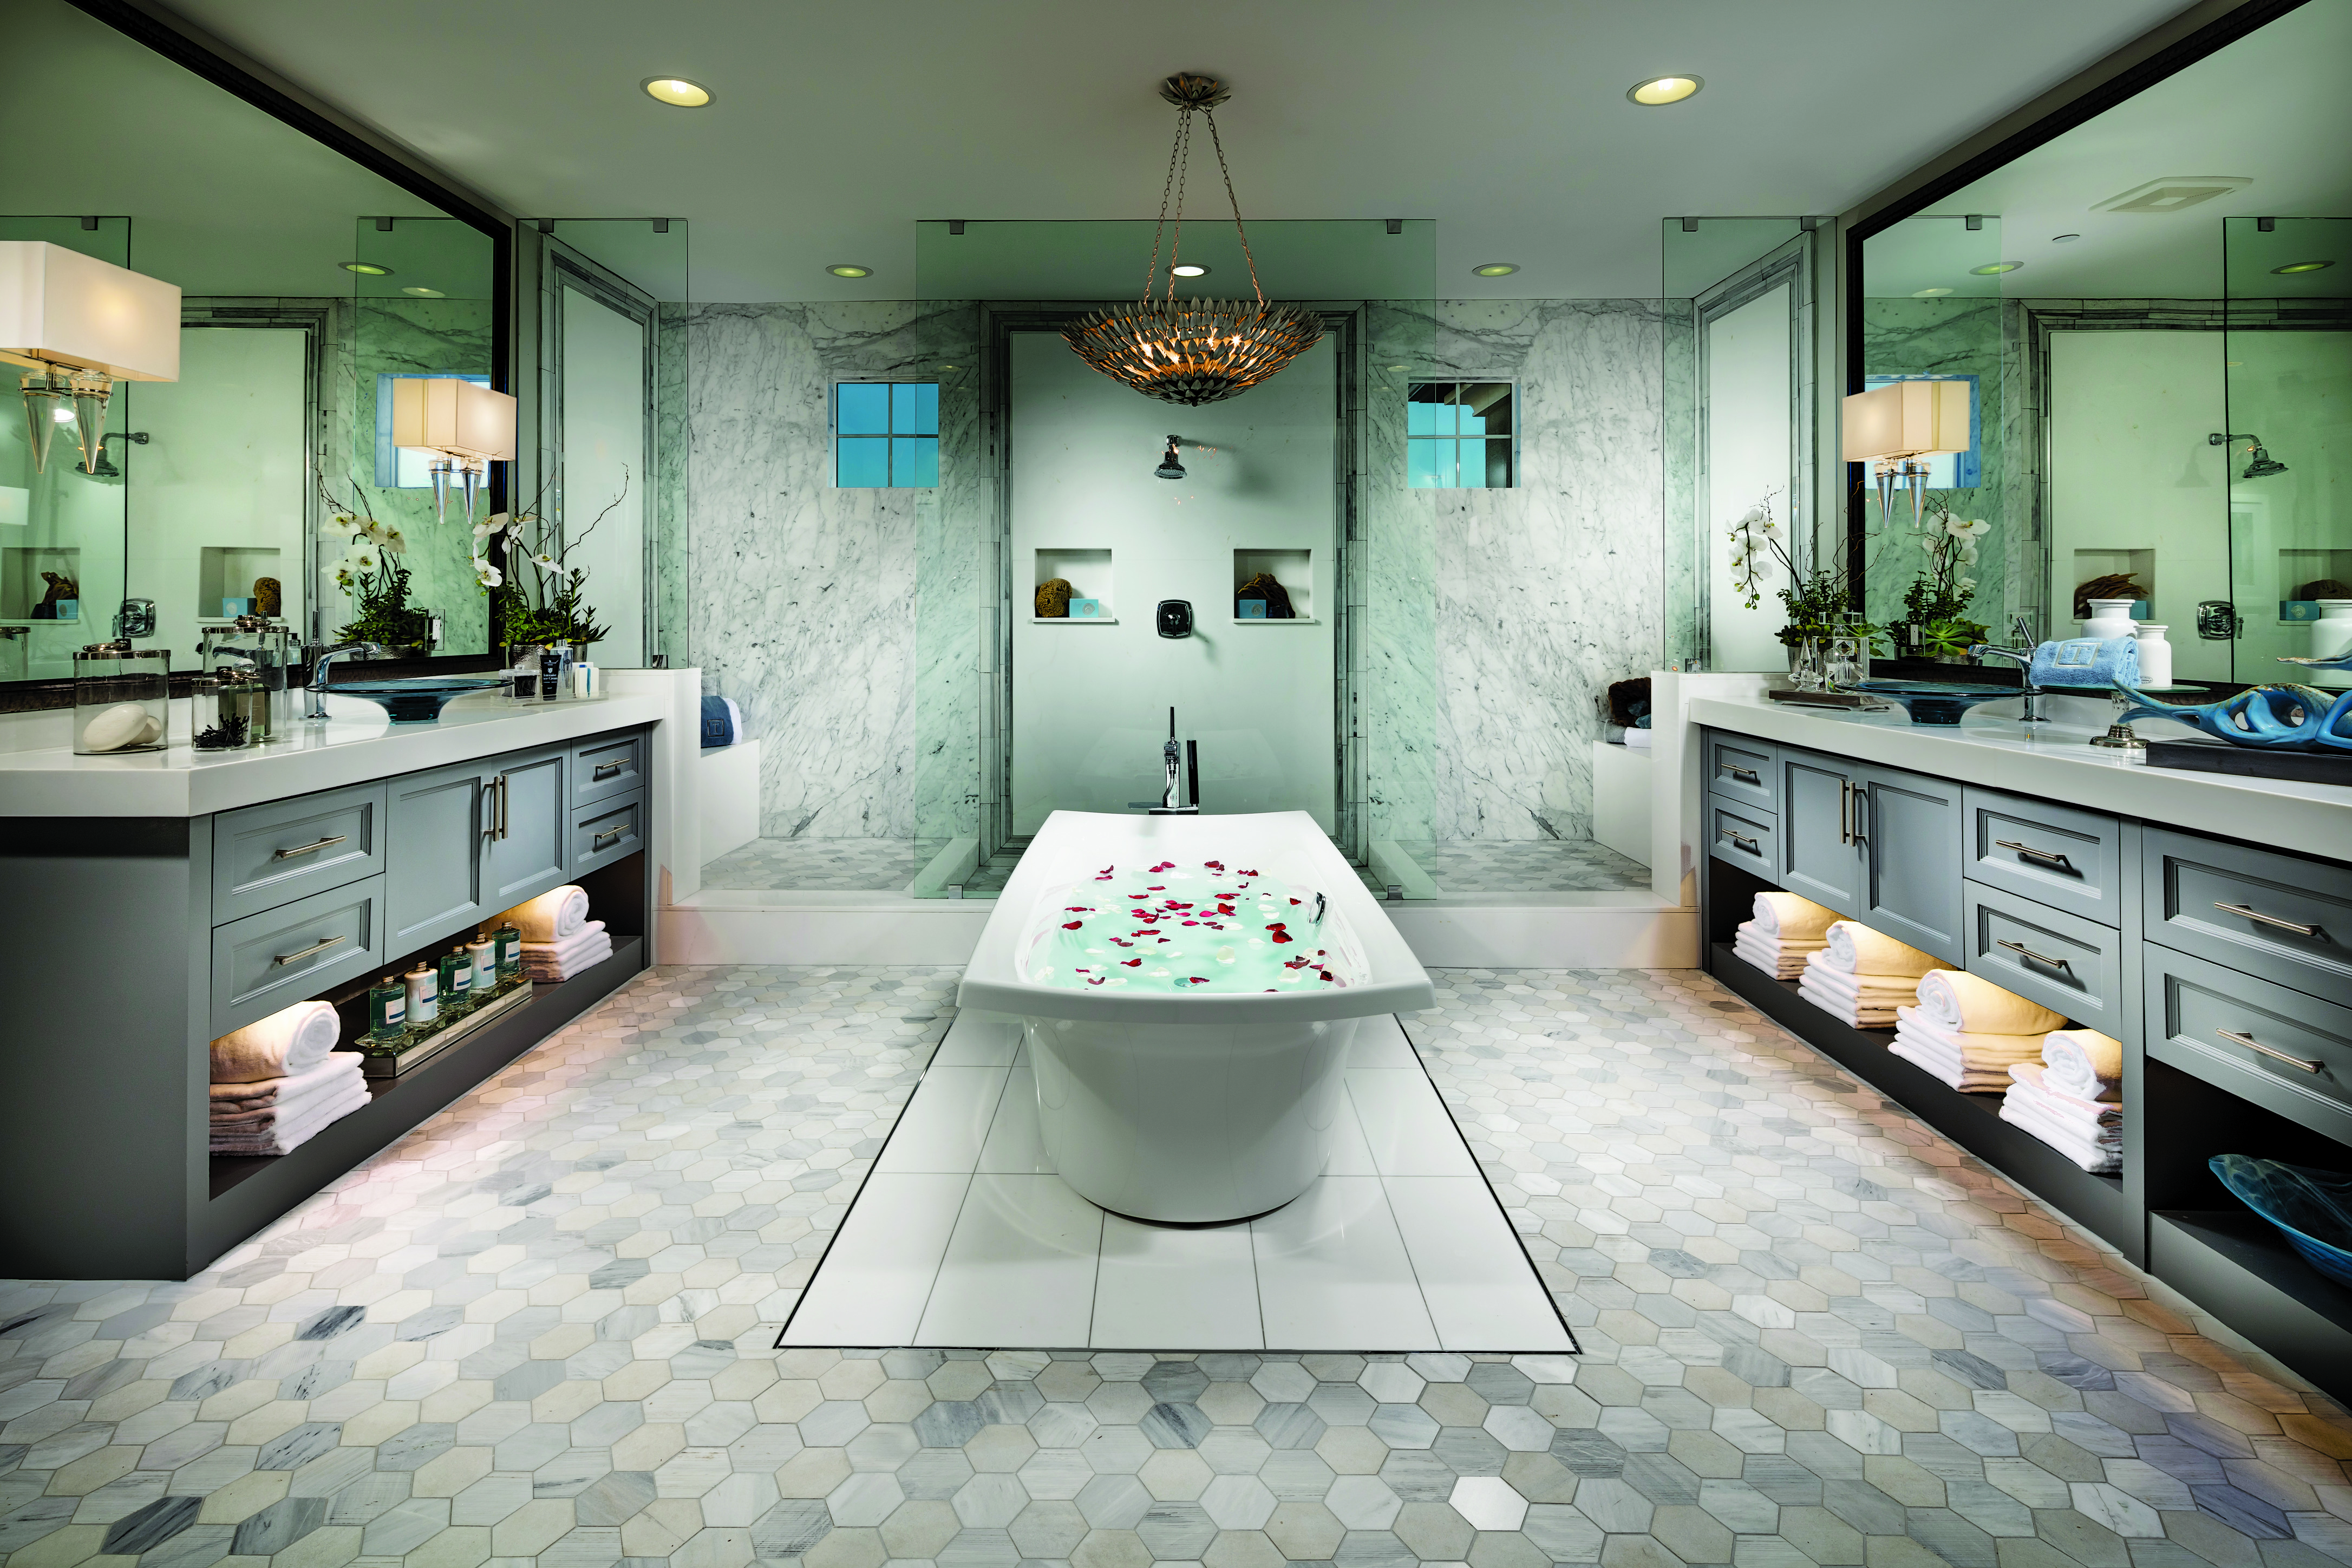 Luxurious Bathroom with a Freestanding Tub at the Center of the Bathroom